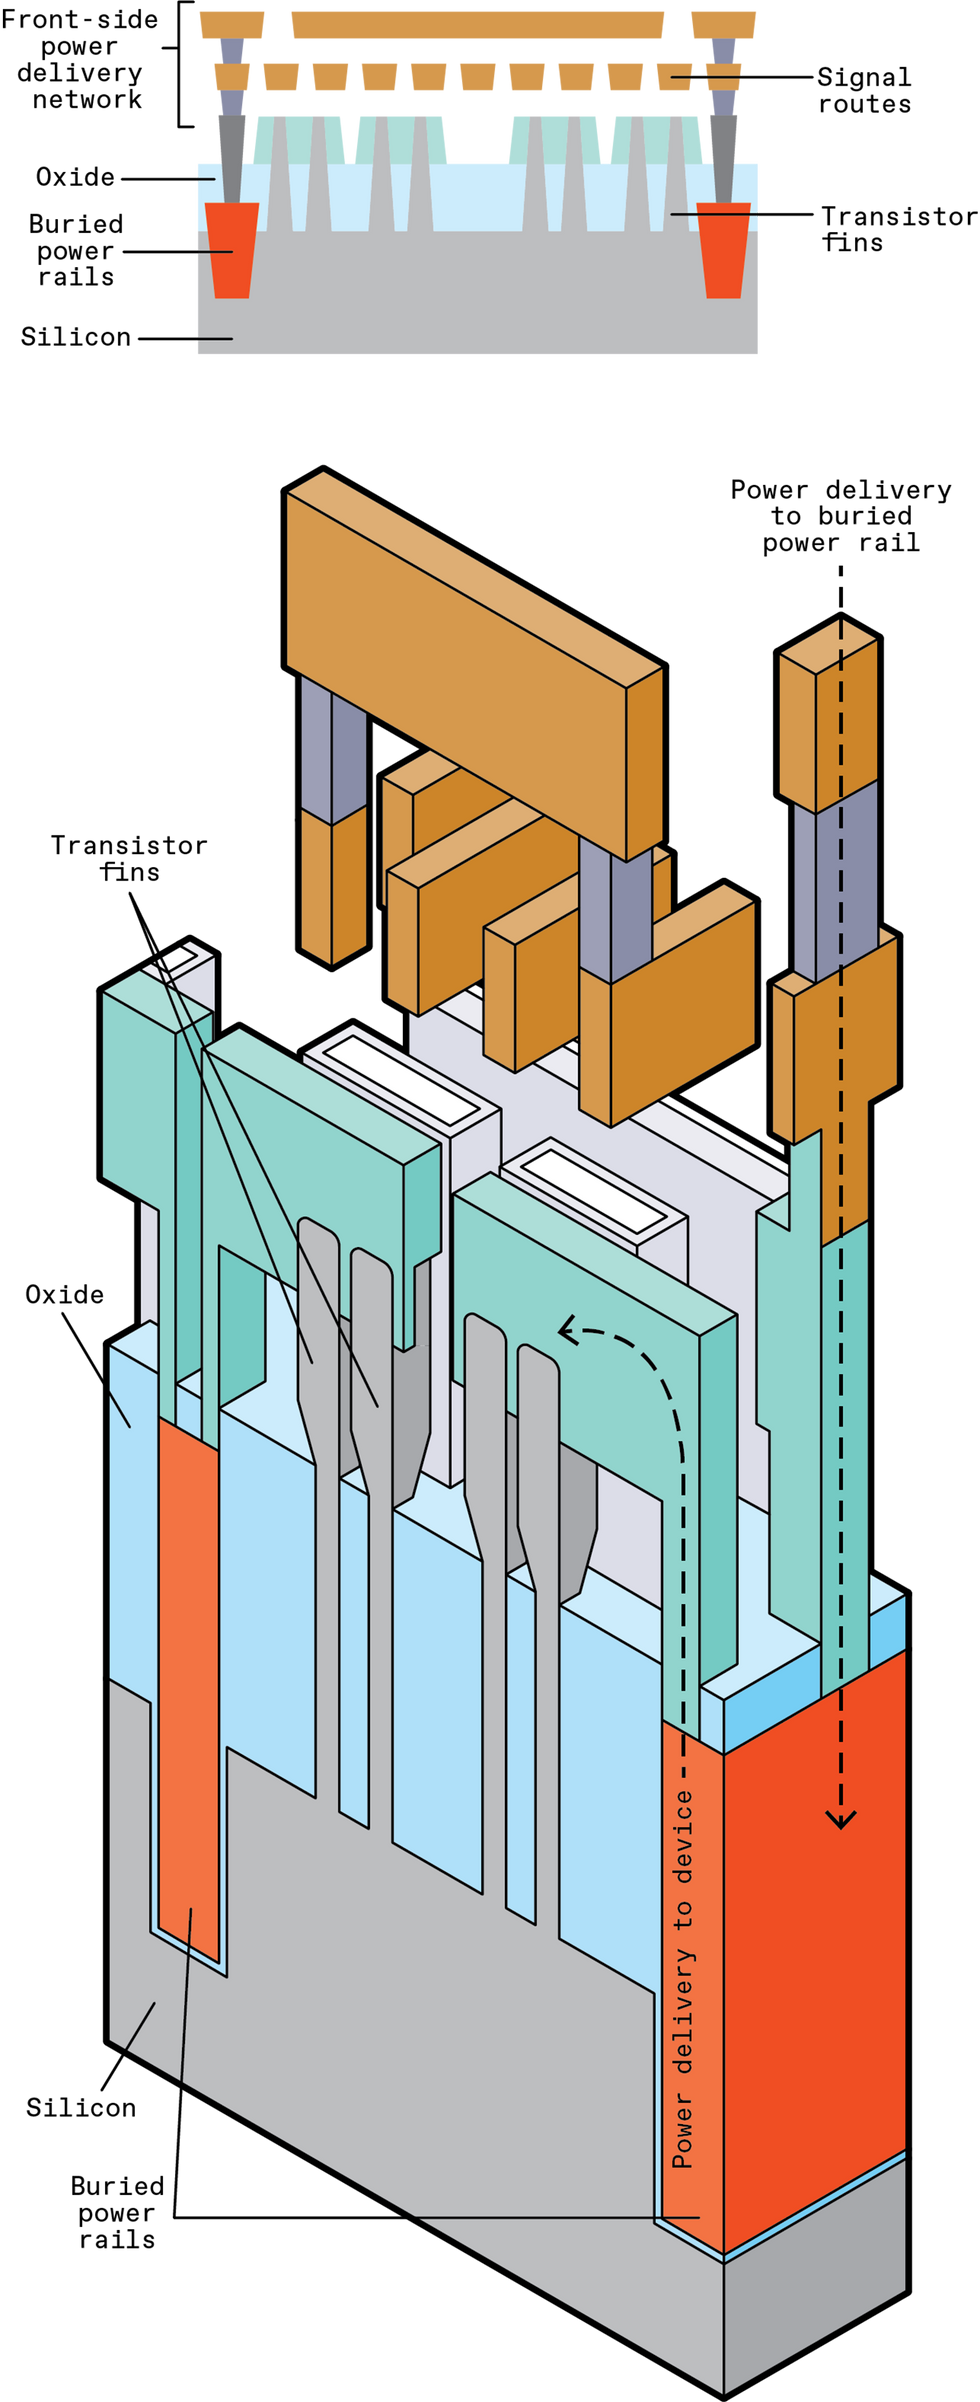 Image of transistors tapping power rails buried within the silicon.